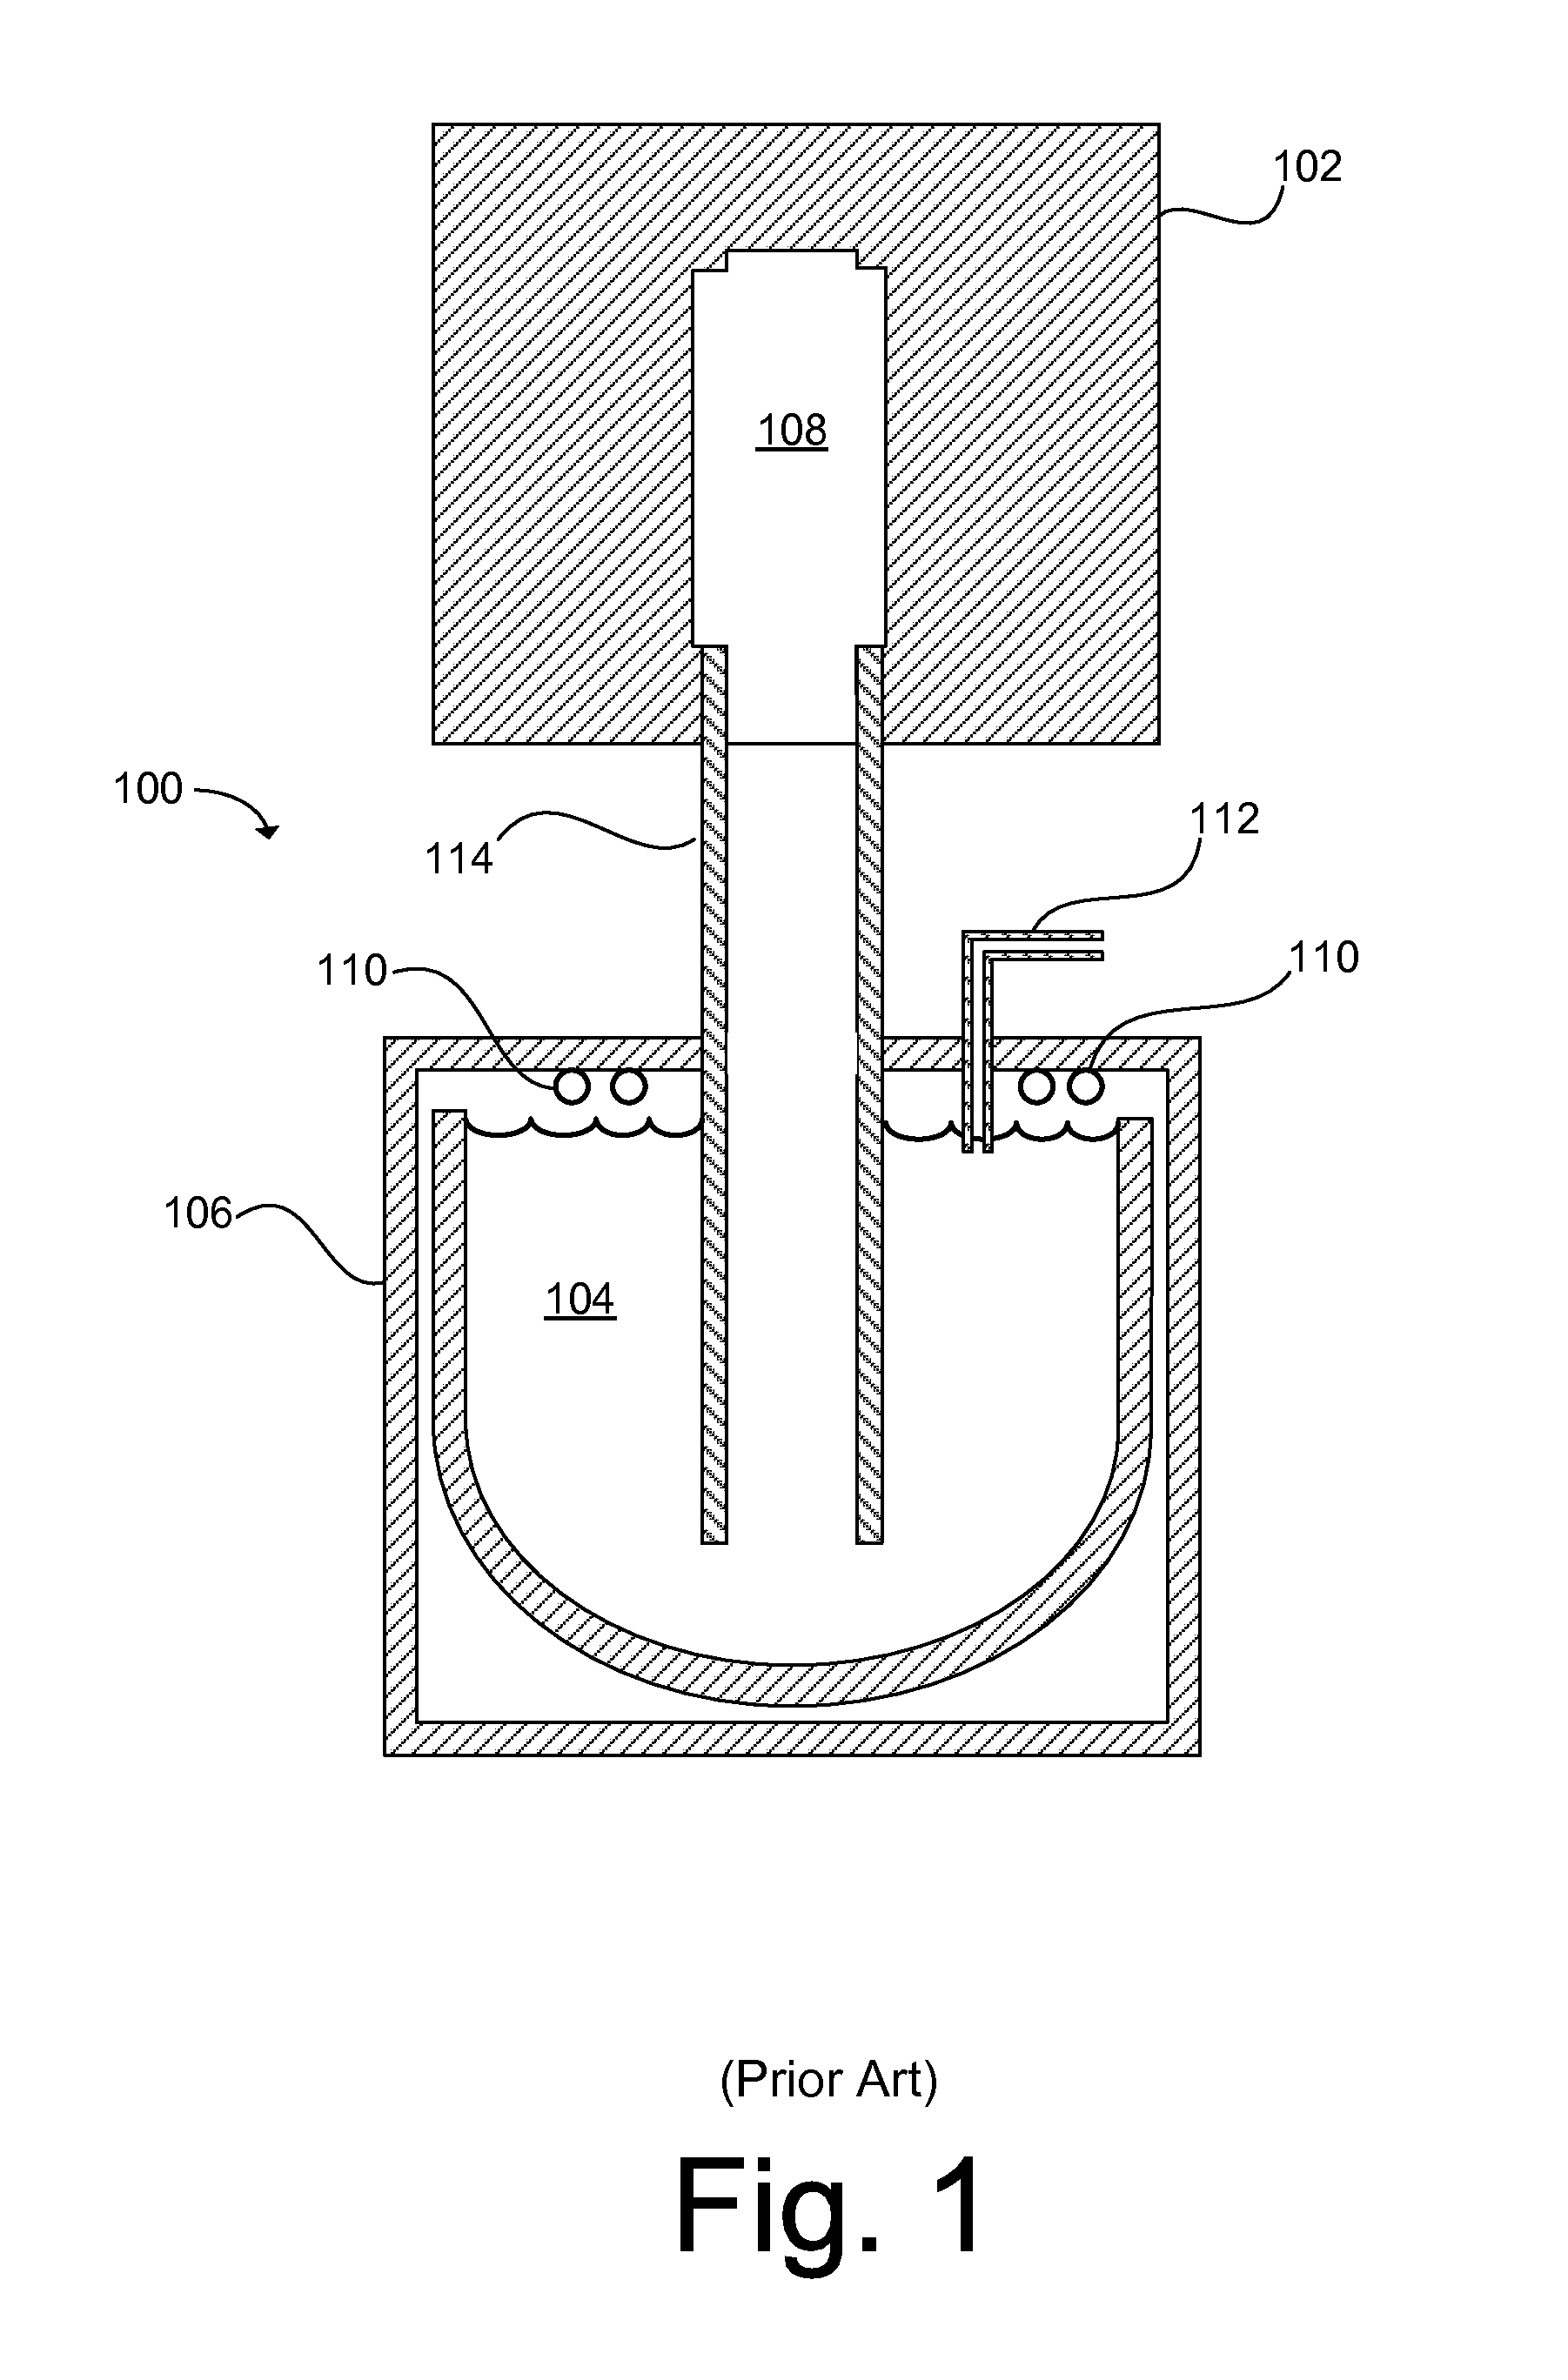 Pump Assembly, System and Method for Controlled Delivery of Molten Metal to Molds